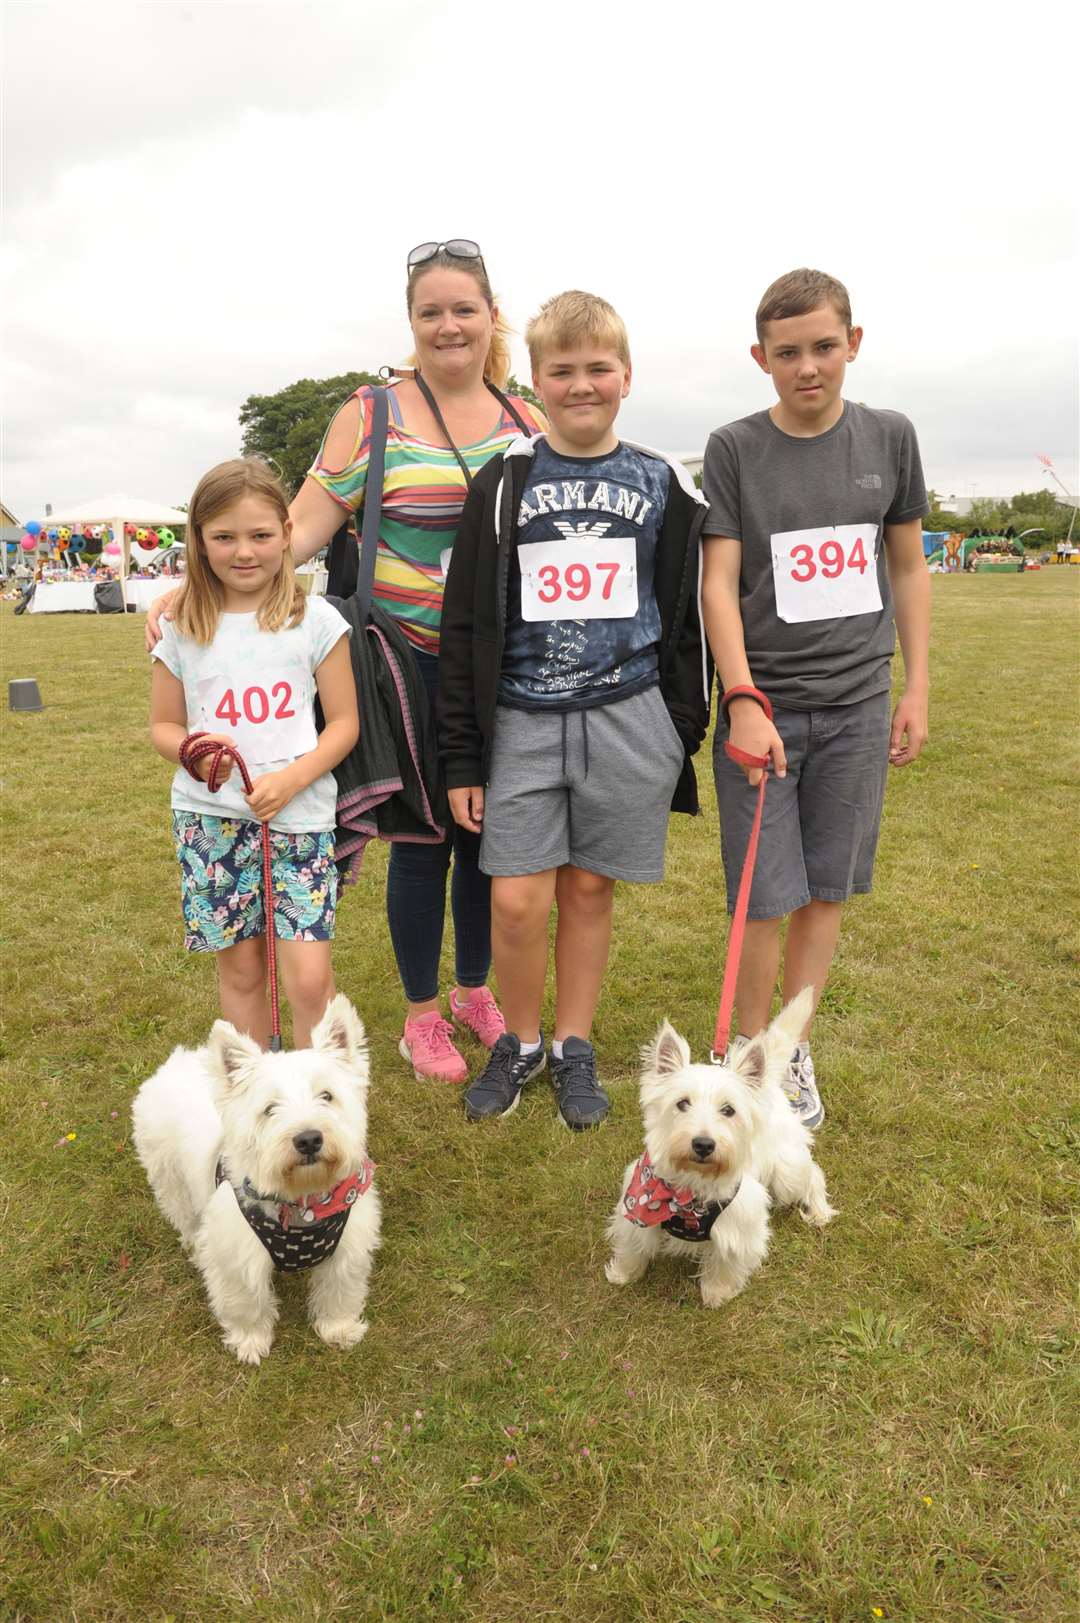 Darent Valley Hospital, Dartford..Stride4Life sponsored walk and funday..2 mile walkers..Emma Hurt with Olivia, Harry and Dylan (9,10,13) and dogs Peewee and Max..Picture: Steve Crispe. (13791391)